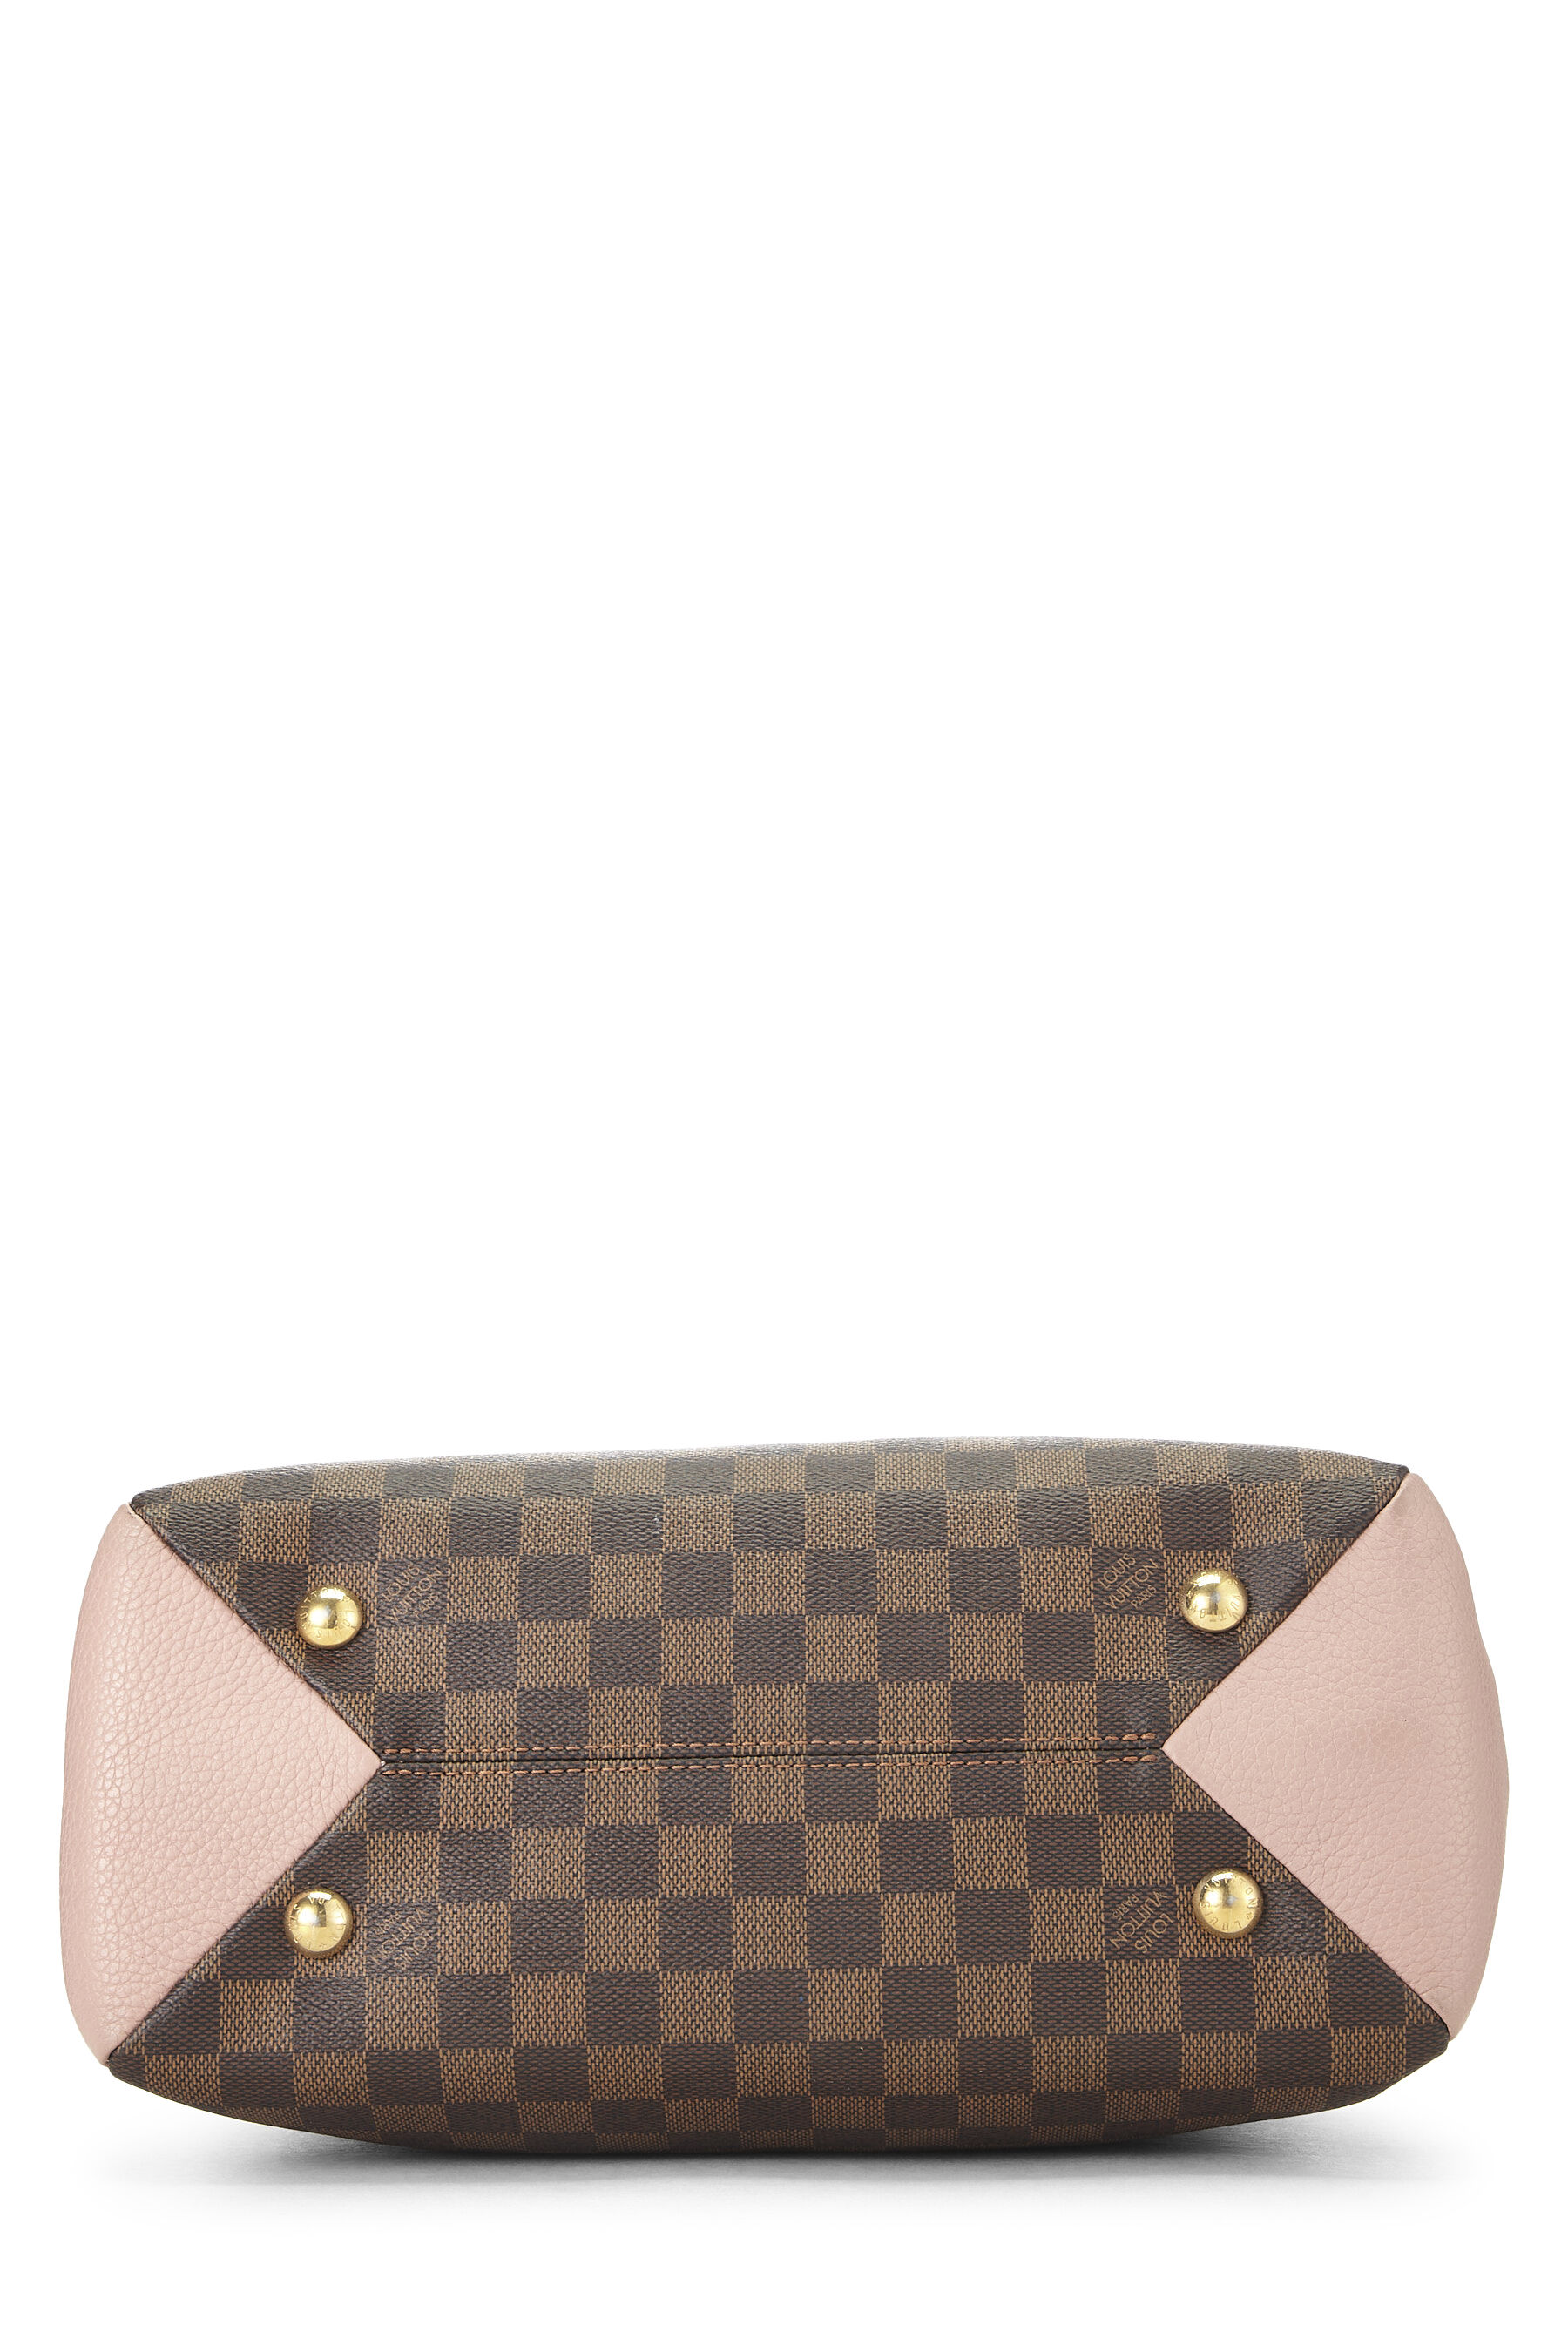 Damier Ebene Canvas & Pink Leather Brittany